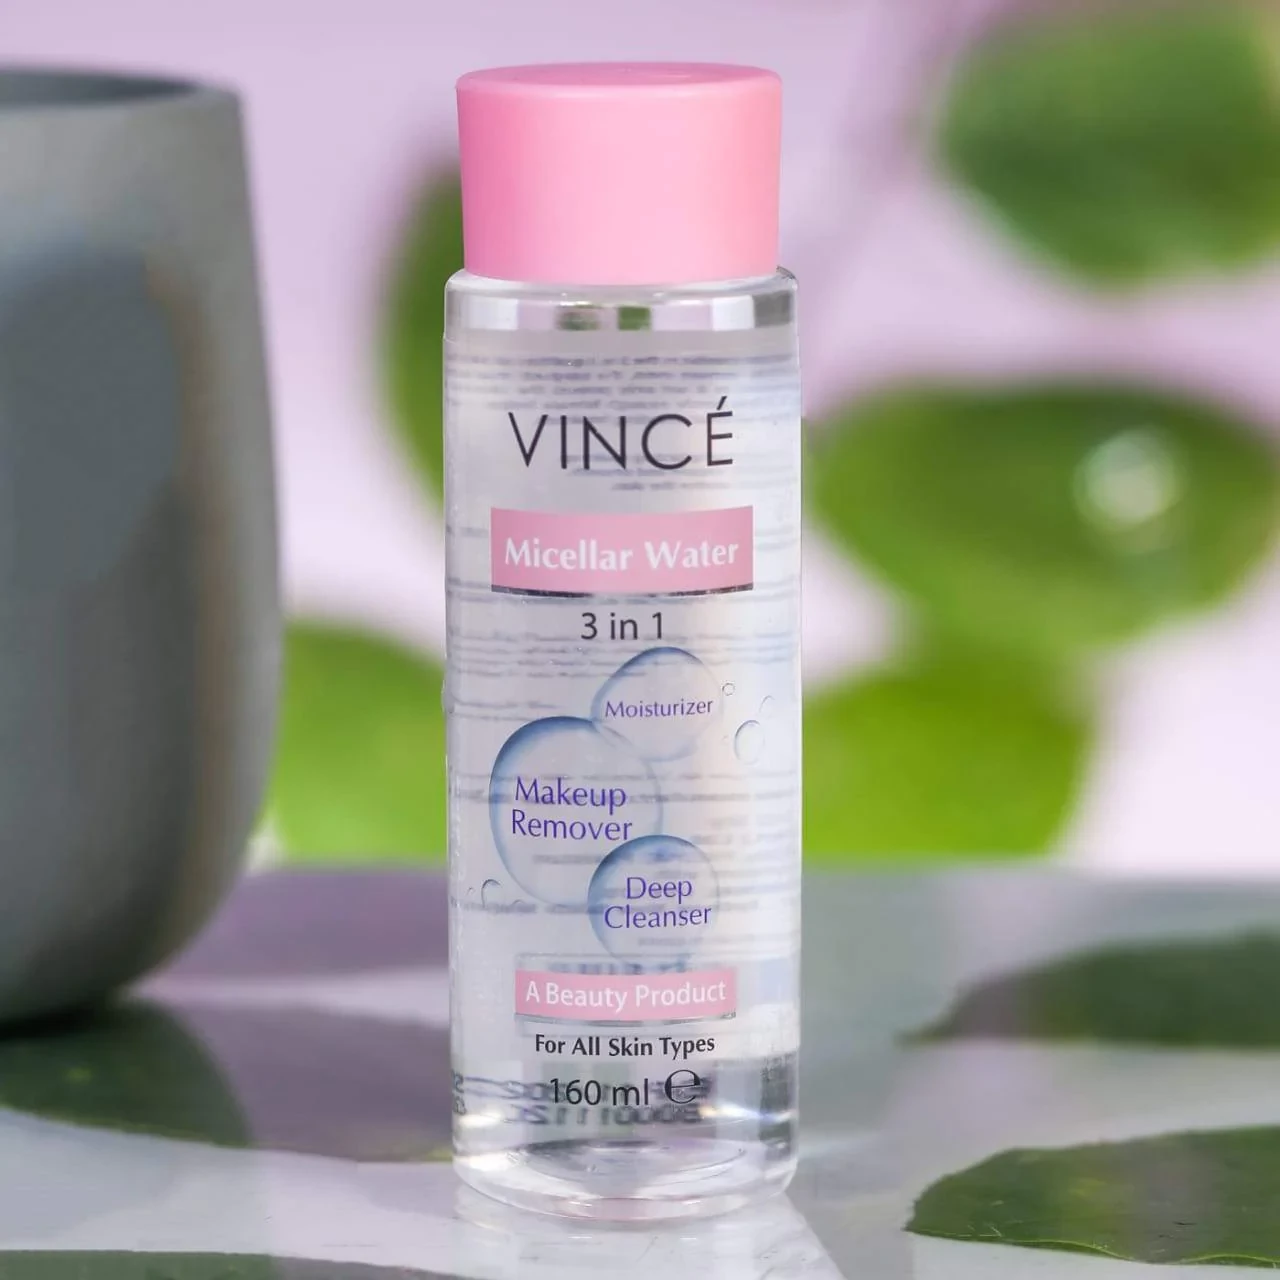 VINCE MICELLAR WATER 3 IN 1 MAKEUP REMOVER 160ML